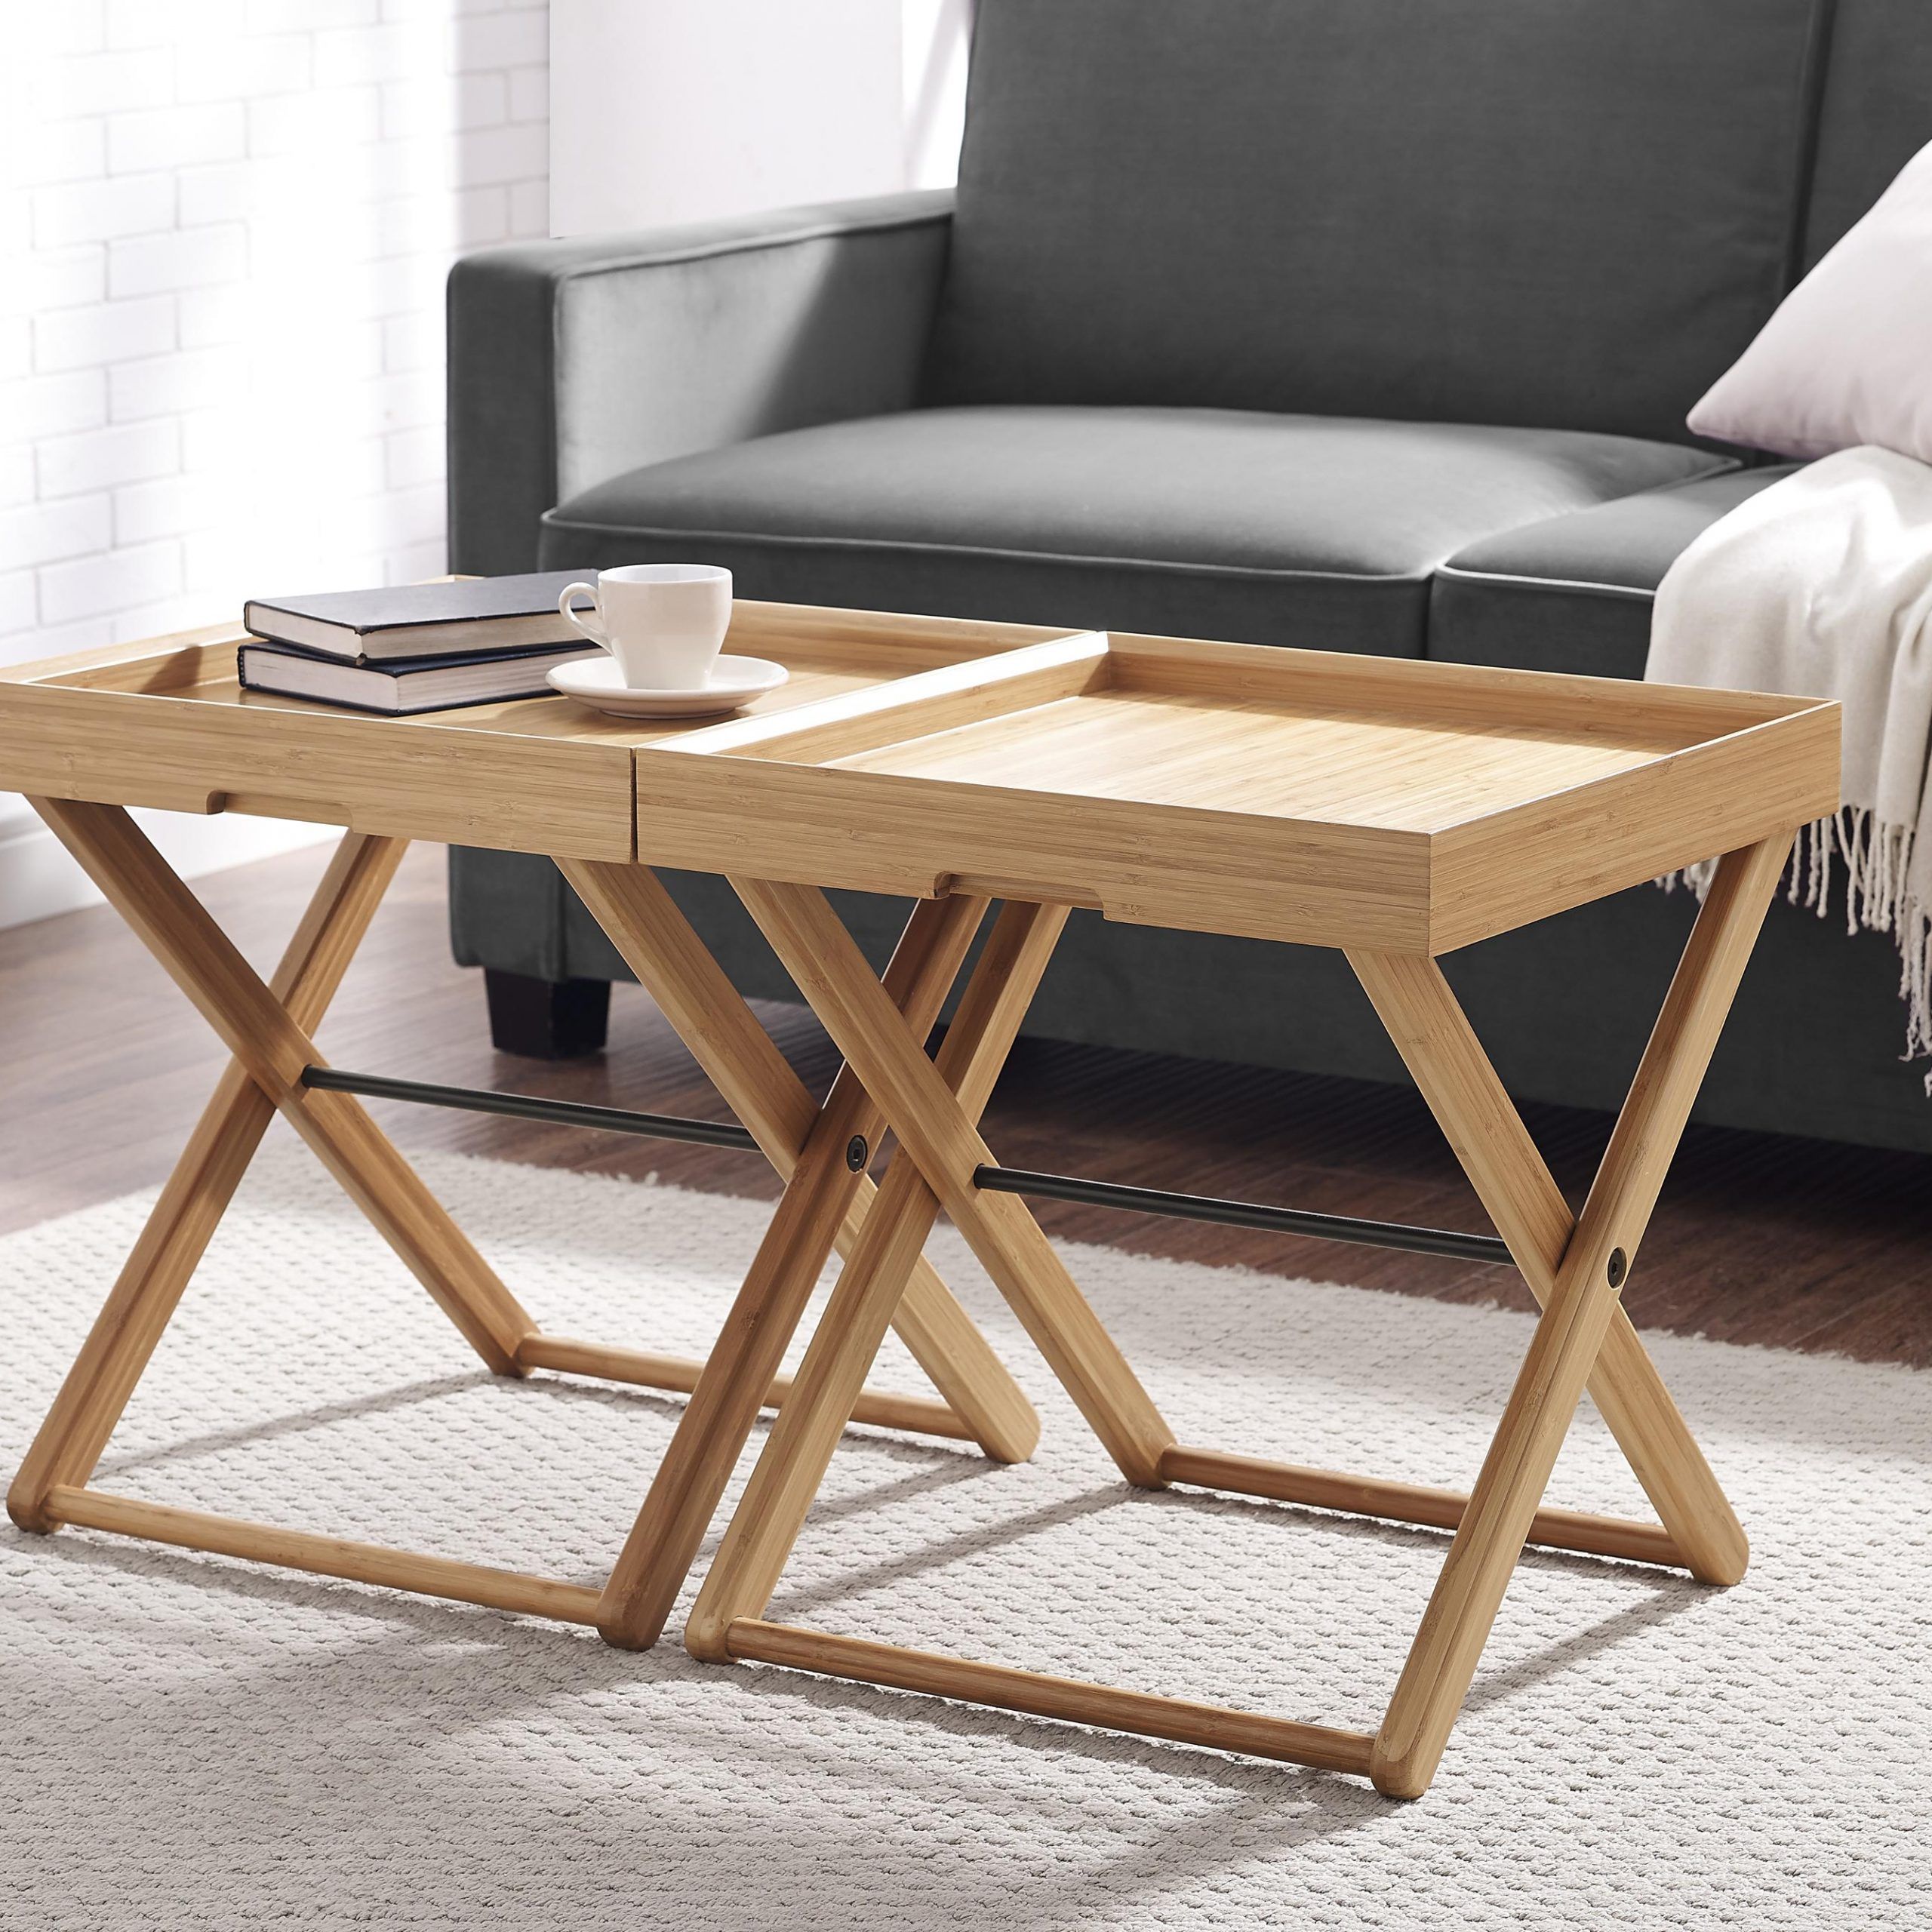 Bamboo Tray Table Caramelized Modern Telinegreenington (gt001ca) For Caramalized Coffee Tables (View 10 of 20)